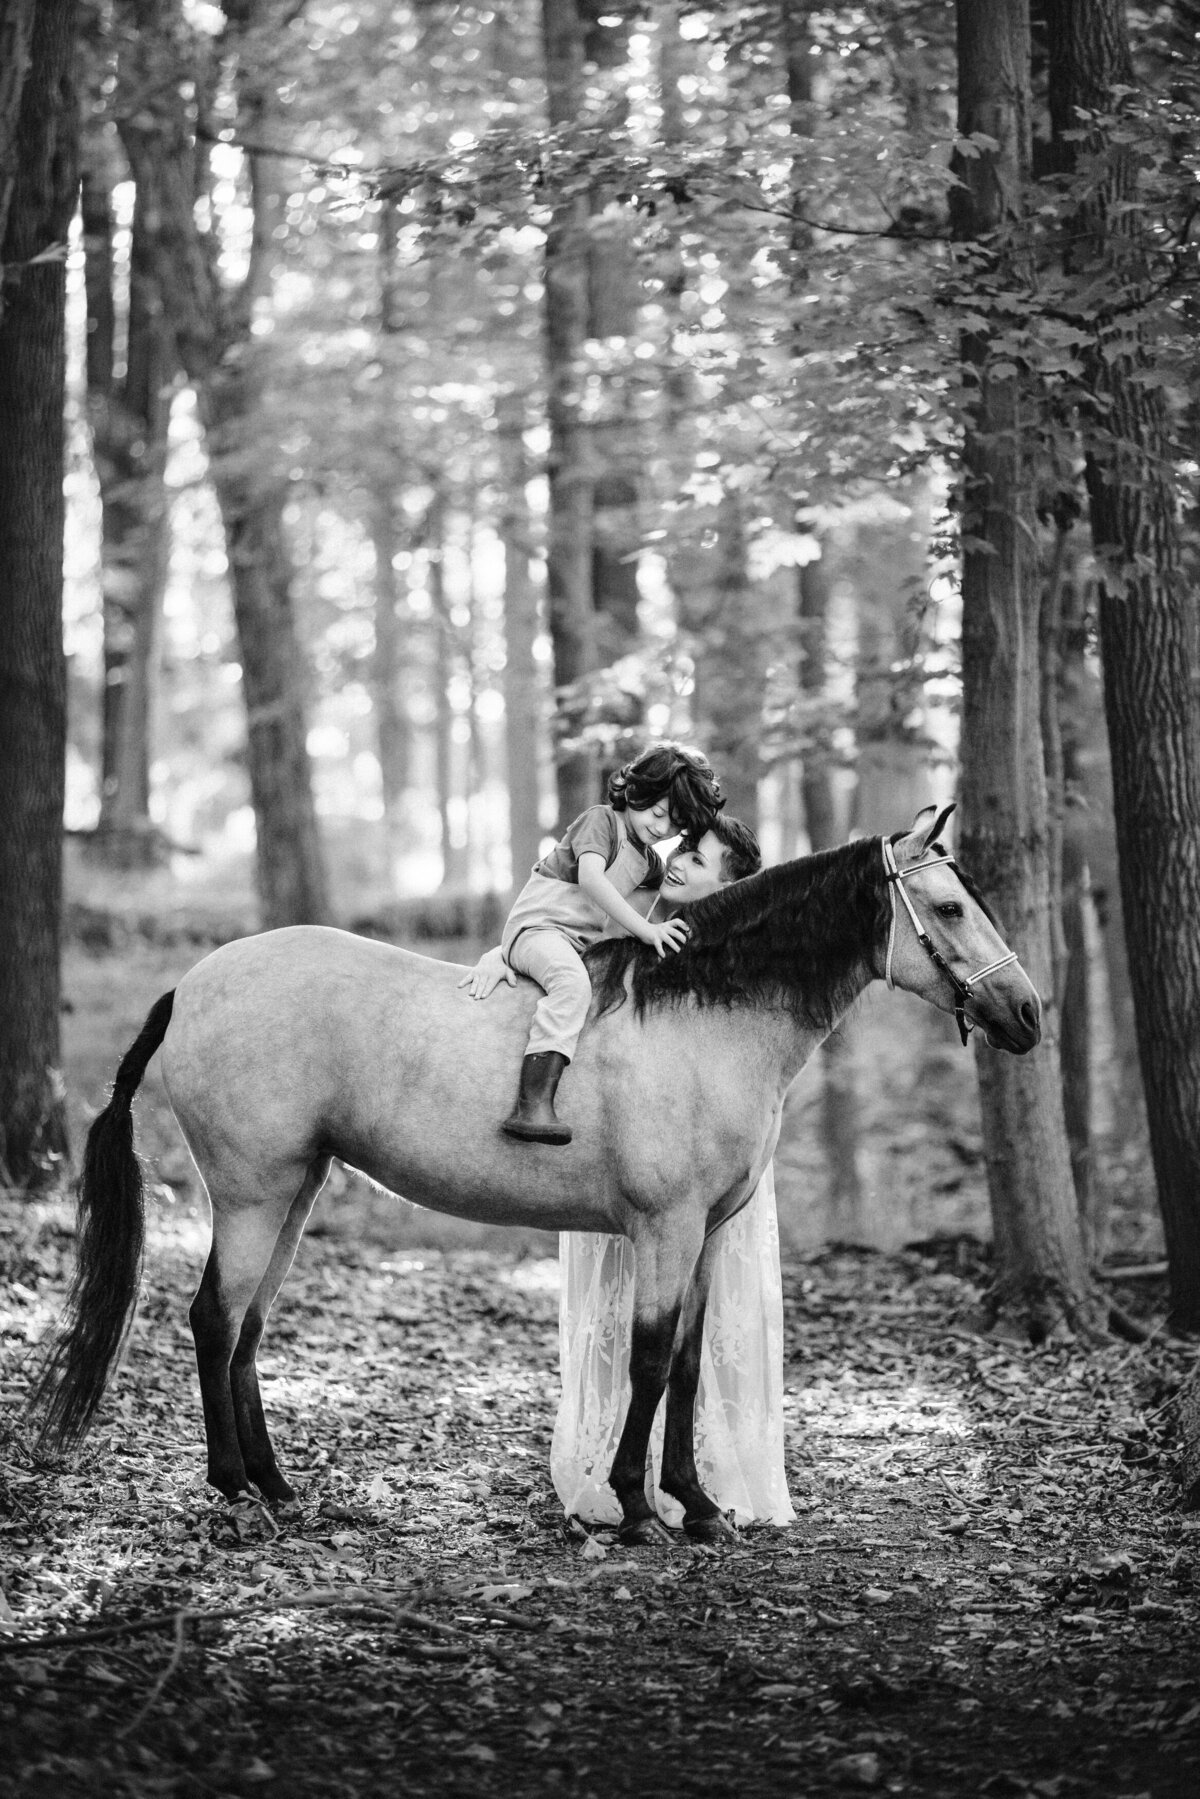 Mother and child take photos on horse during unique family photography session in Princeton, New Jersey.